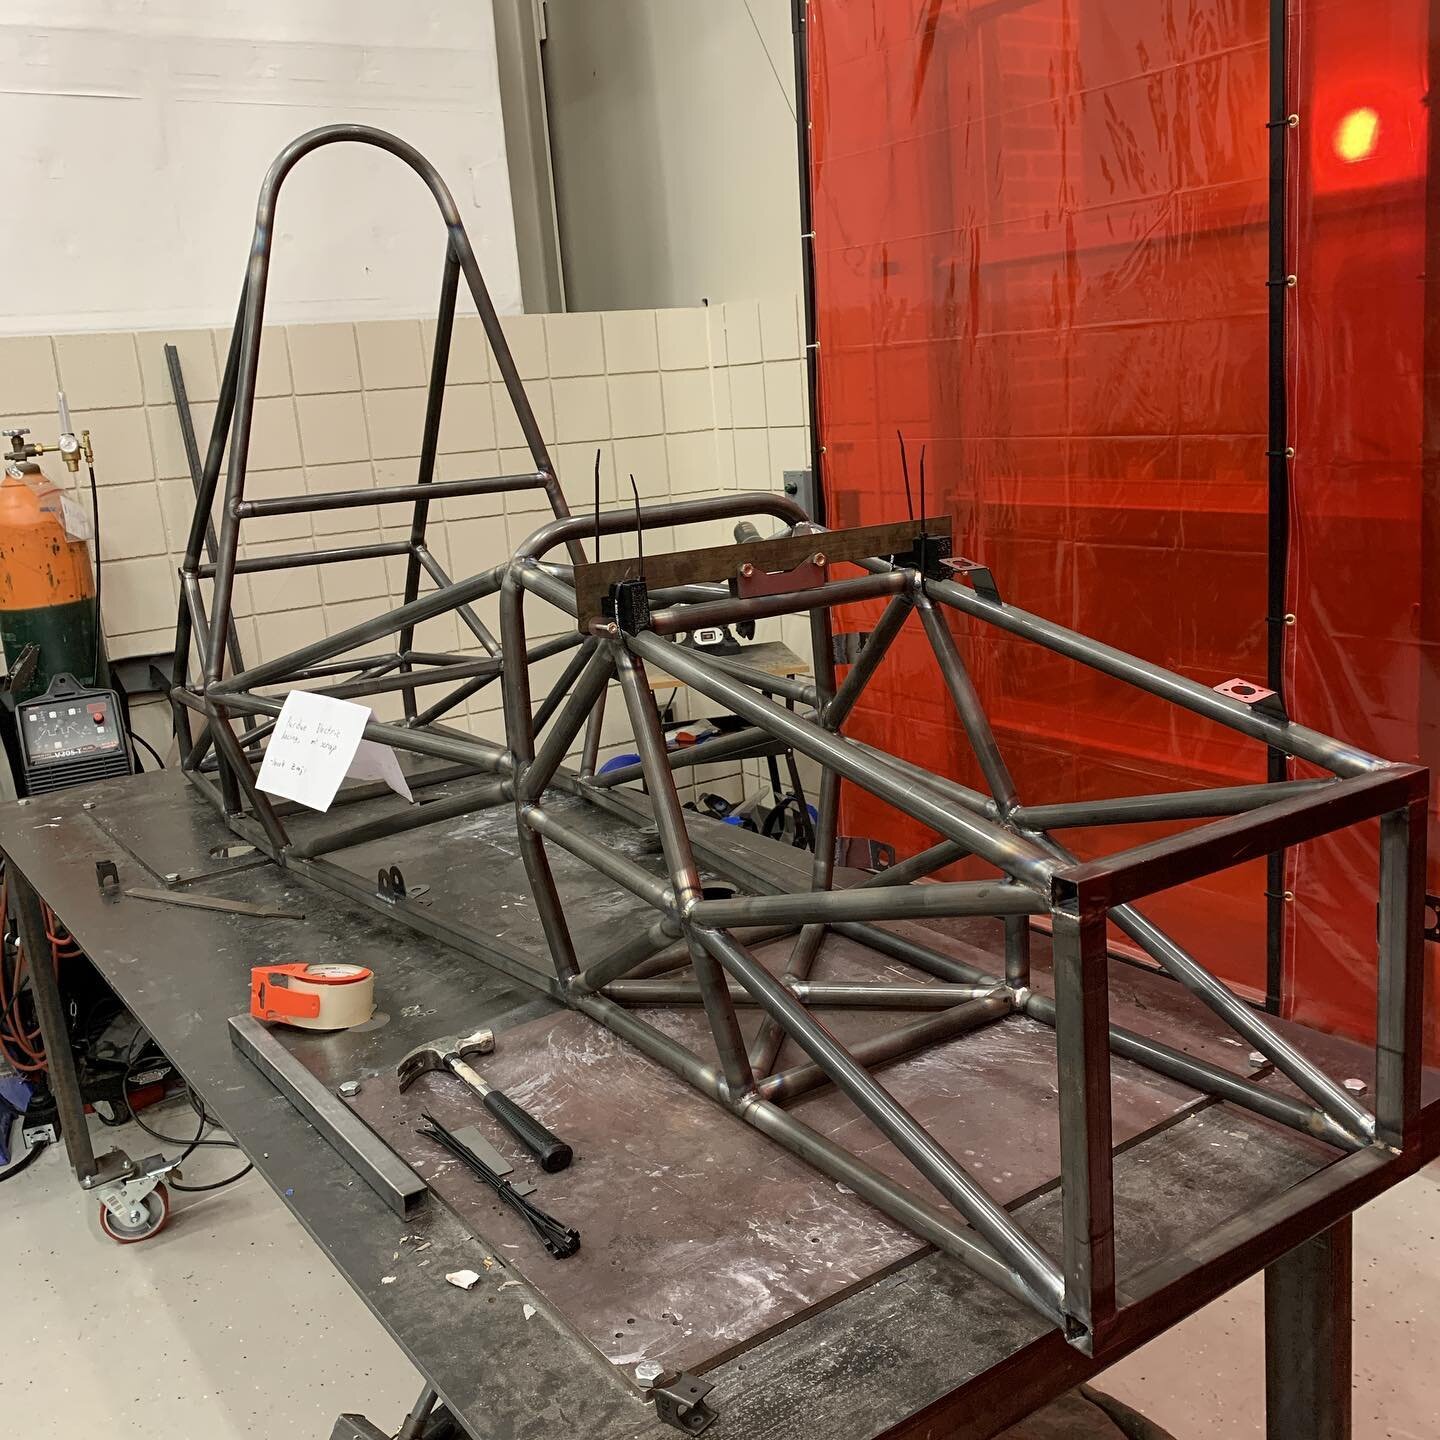 A first look. 
#chassis #beginnings #welding #tabs #newcarsmell